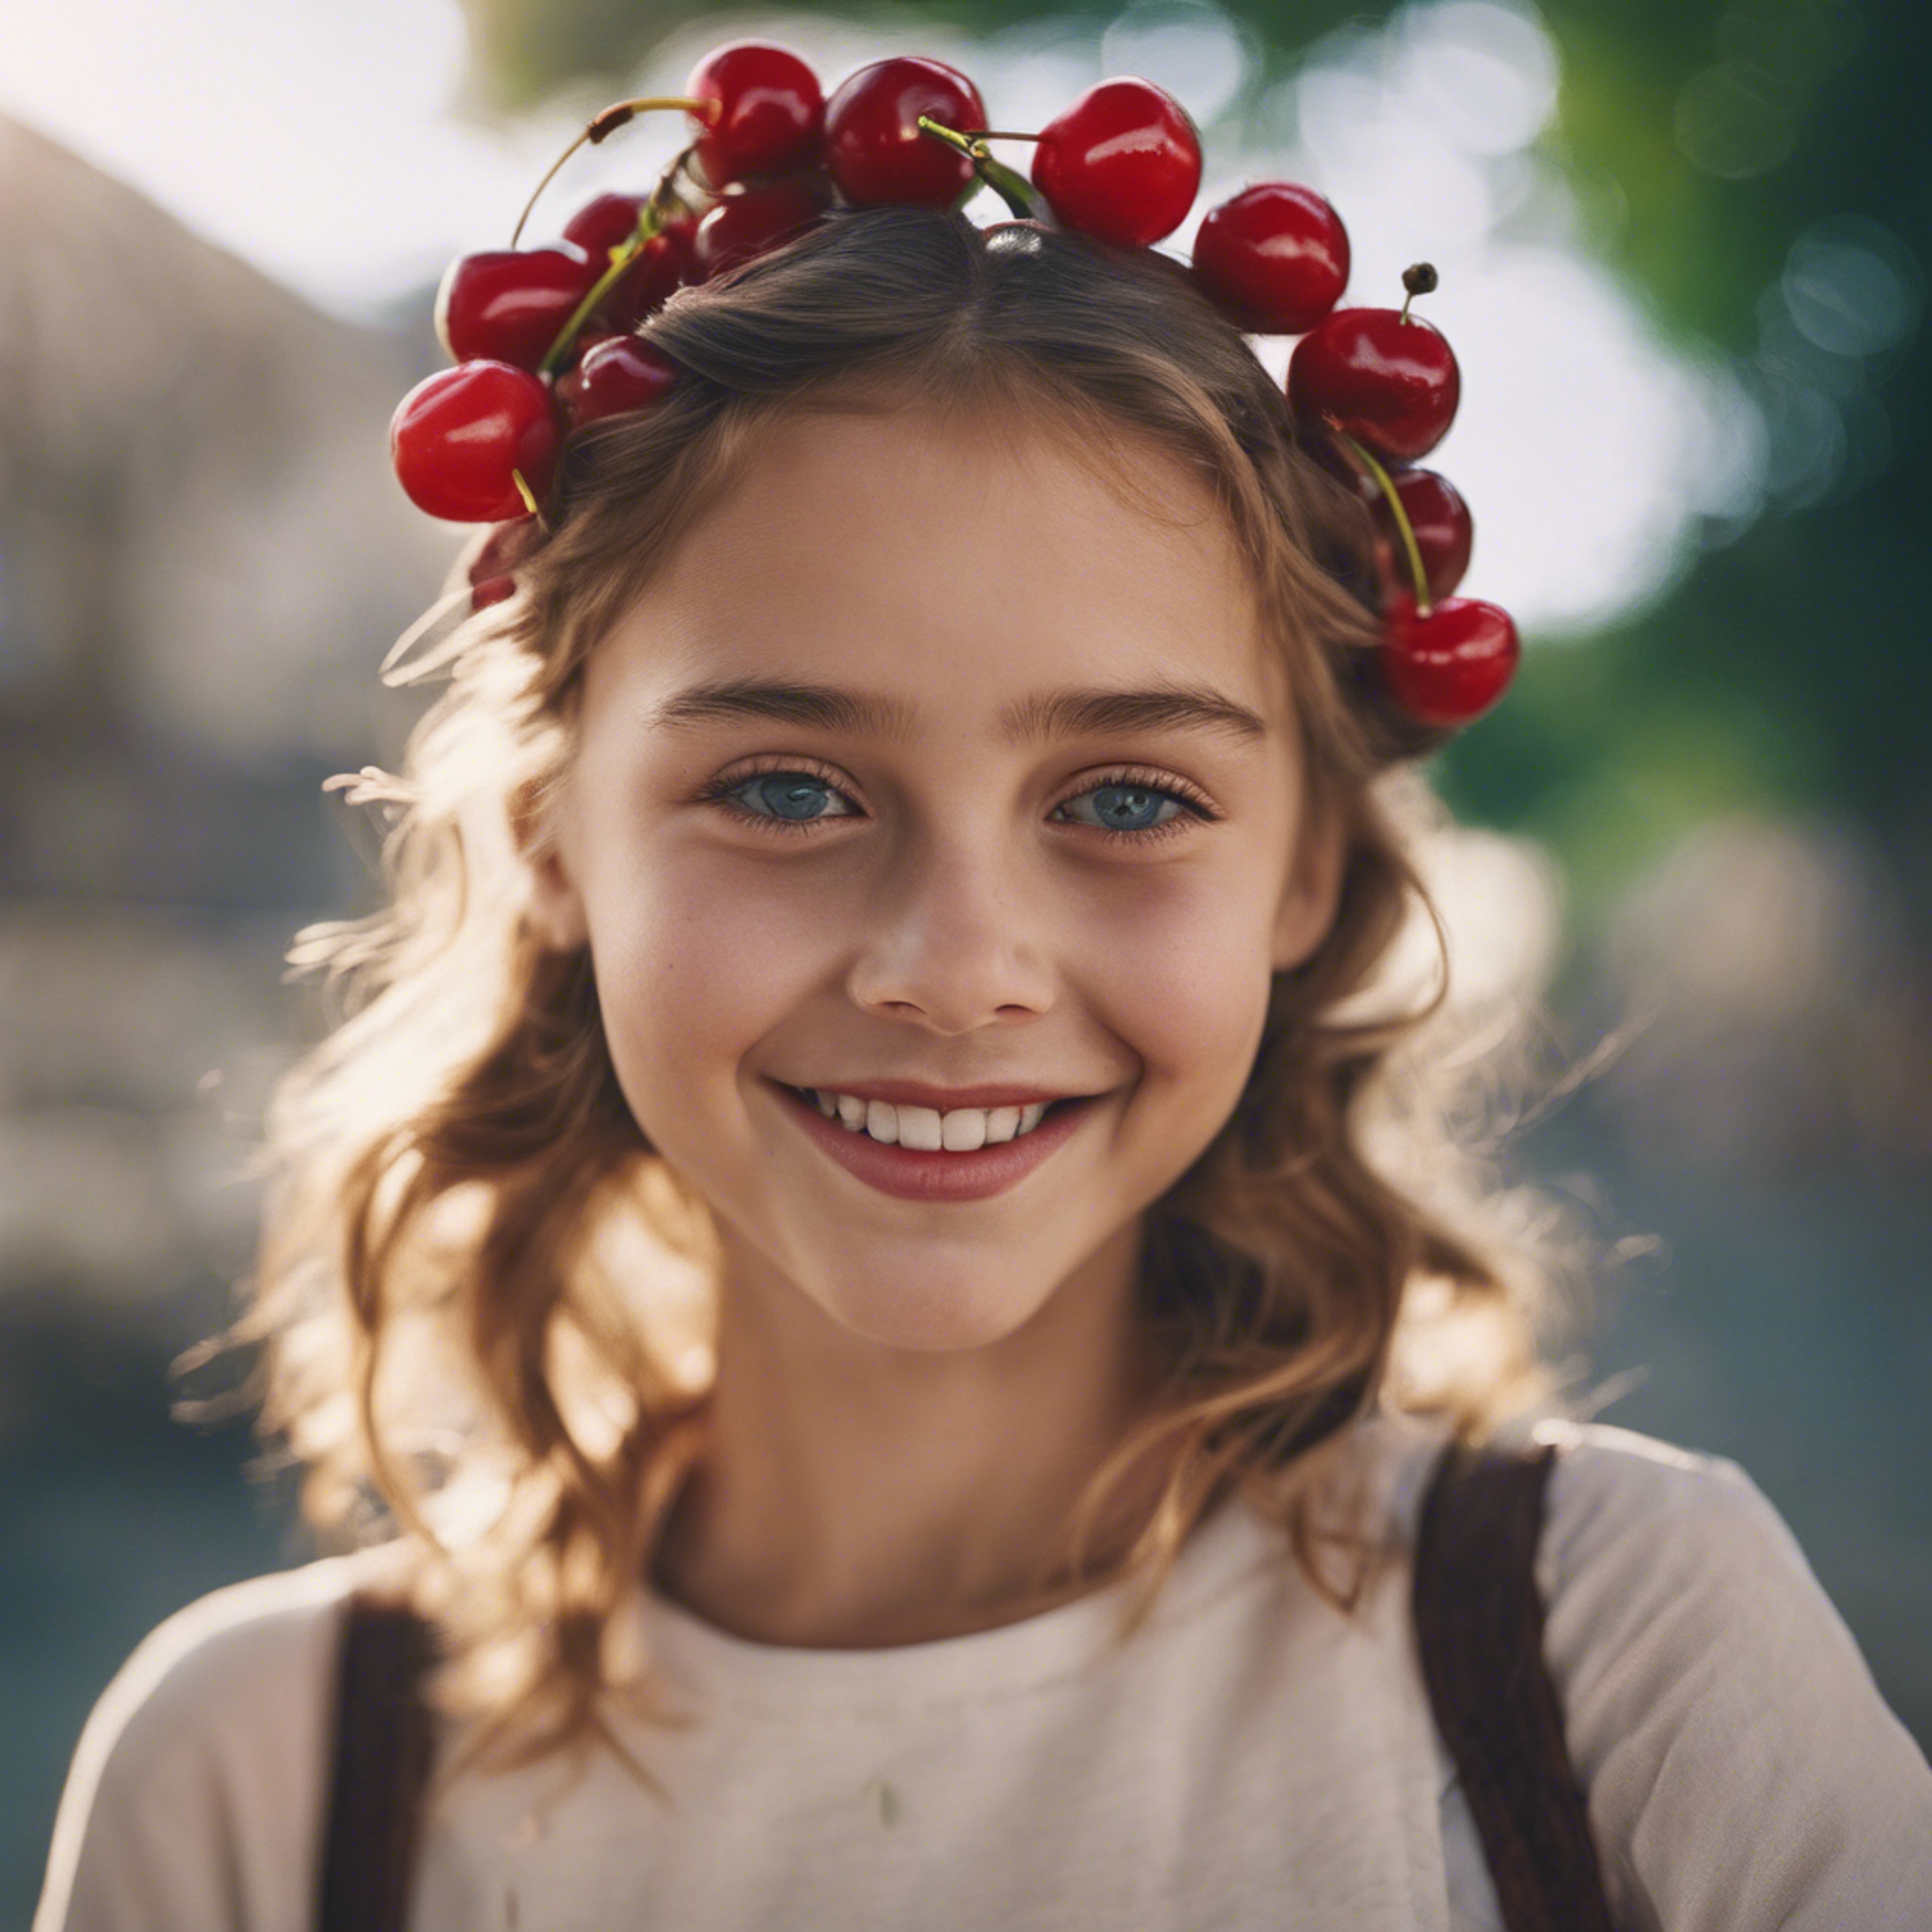 A girl with a cherry barrette in her hair, smiling at the viewer.壁紙[3ffde2b89a9346a6b02b]